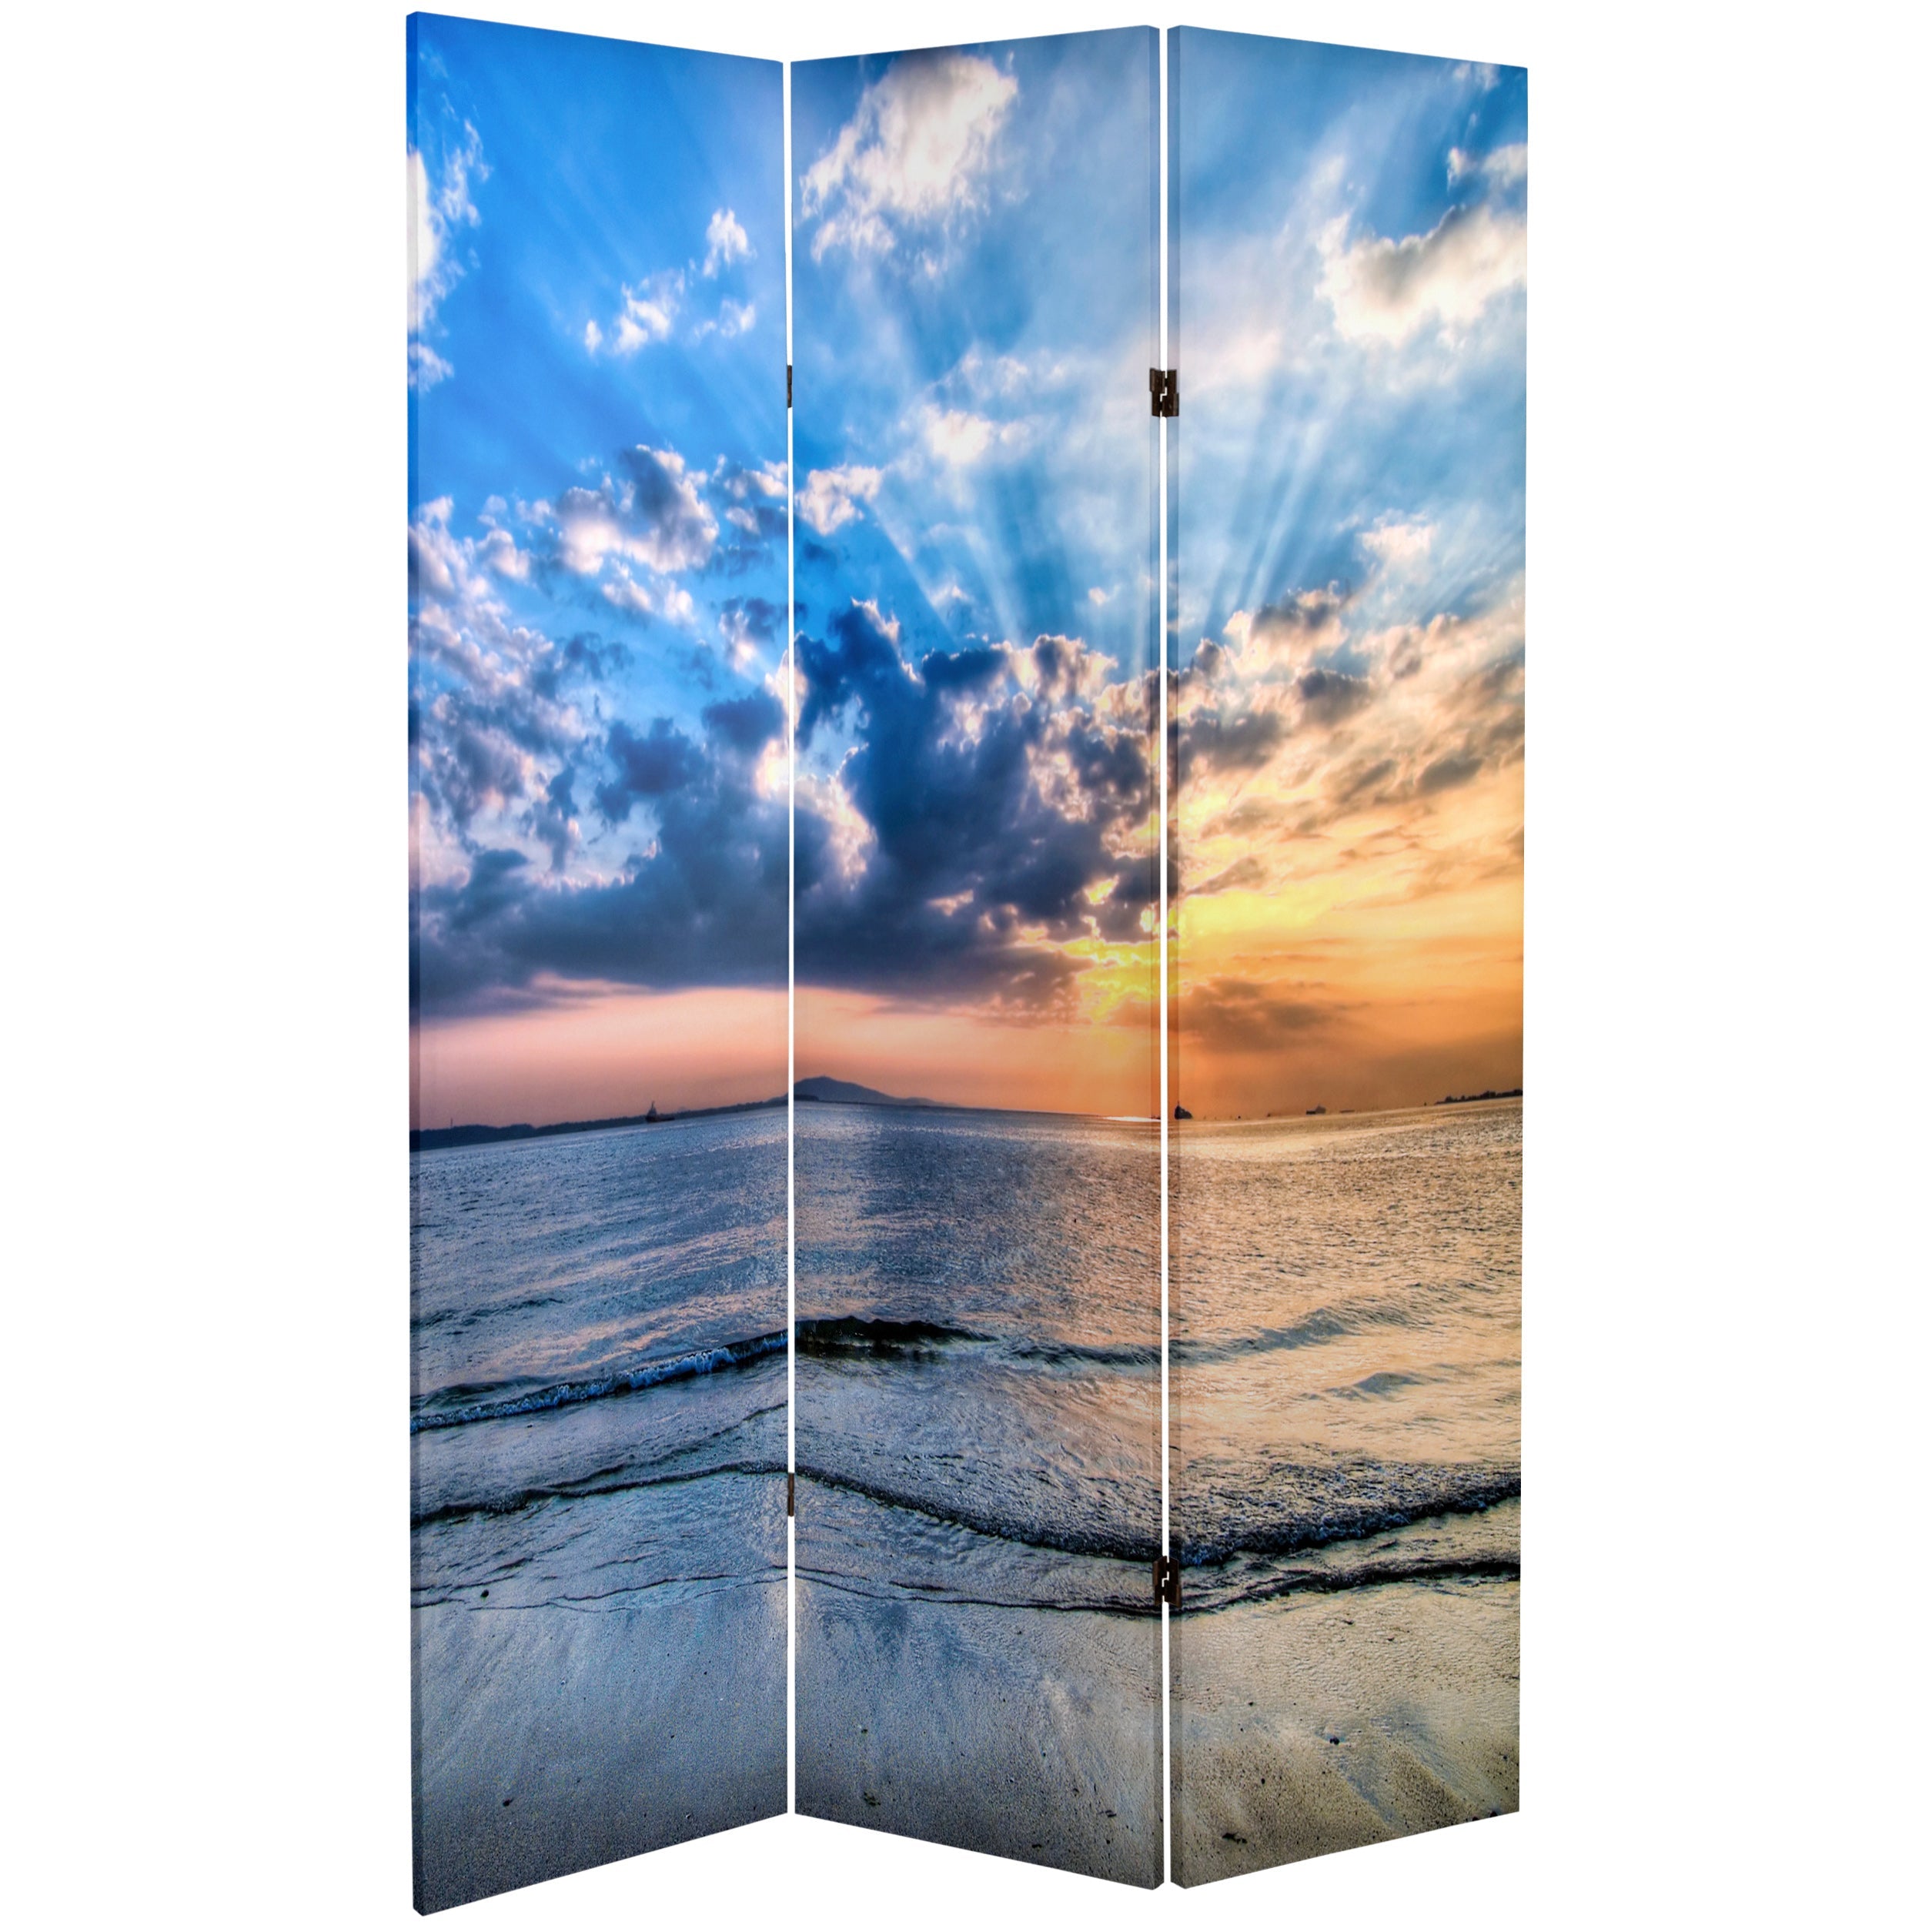 Sunrise Room Divider Art Print Screen (Canvas/Double Sided)